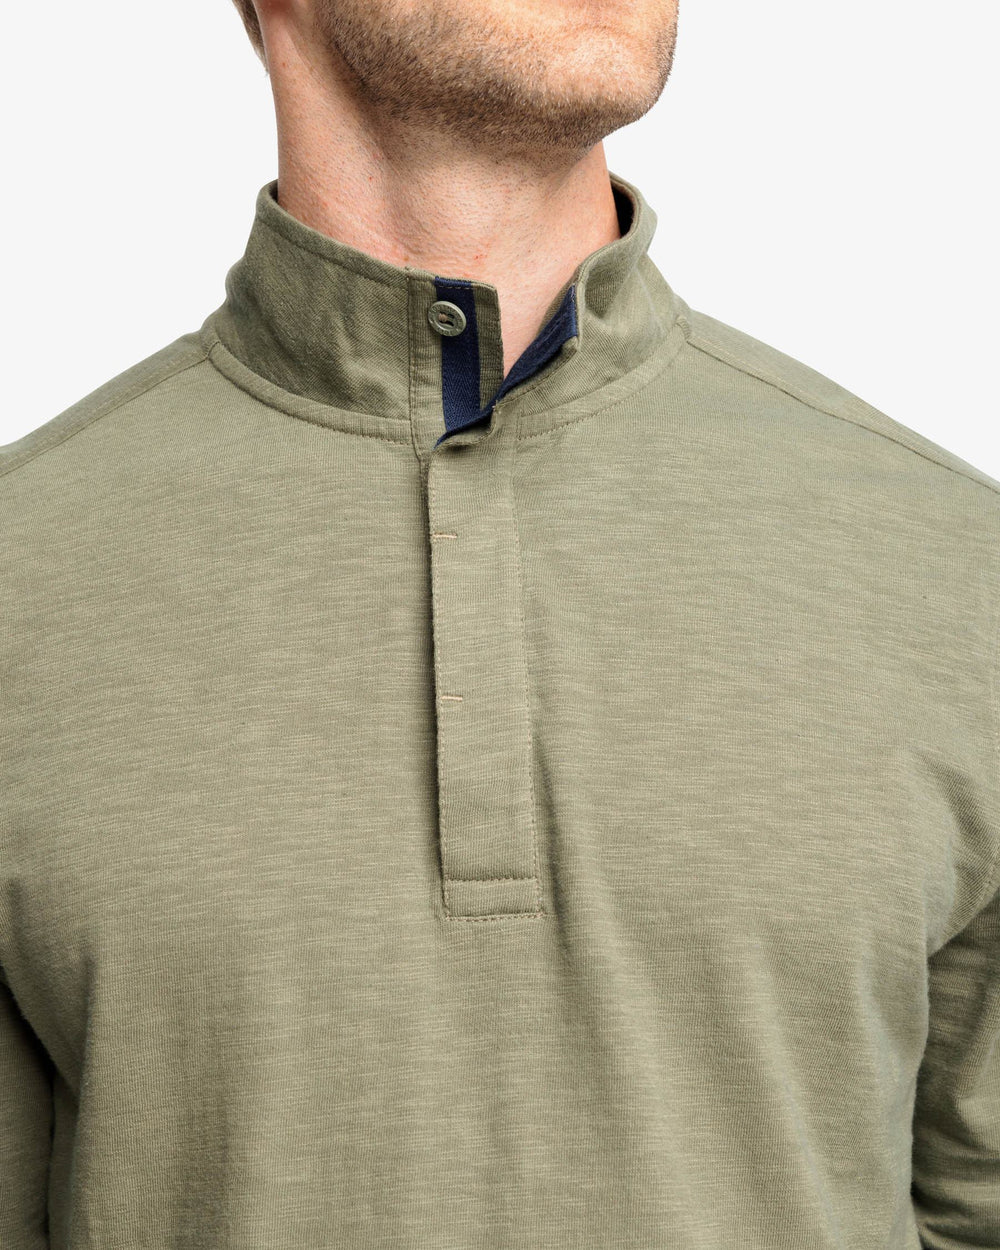 The detail view of the Sun Farer Ocean View Quarter Button Pullover by Southern Tide - Pine